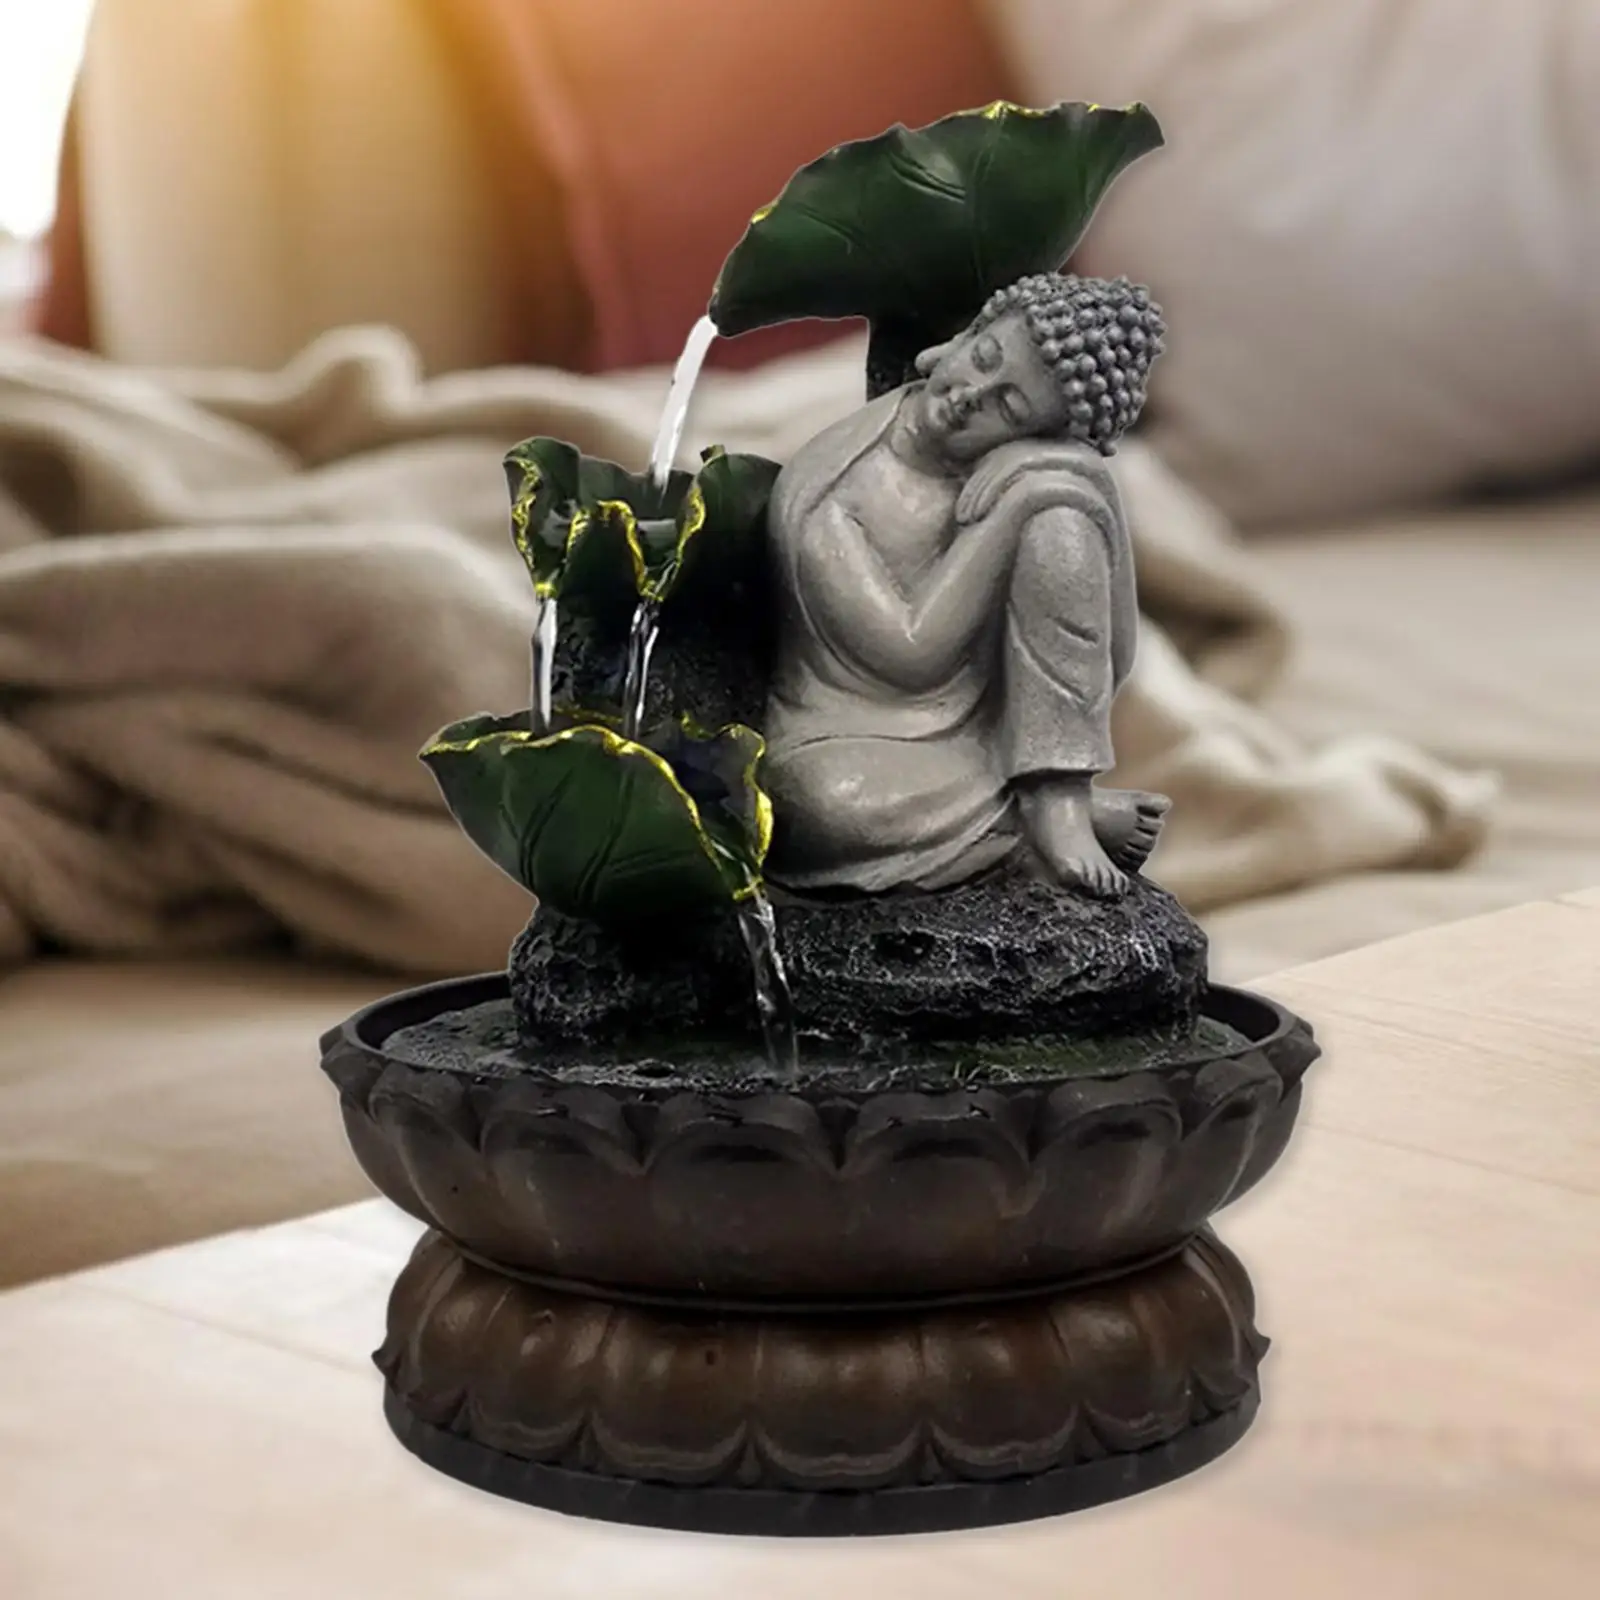 Buddha Tabletop Water Fountain Decoration Landscape Resin Feng Shui Sculpture Running Water with Light Water Feature for Desk